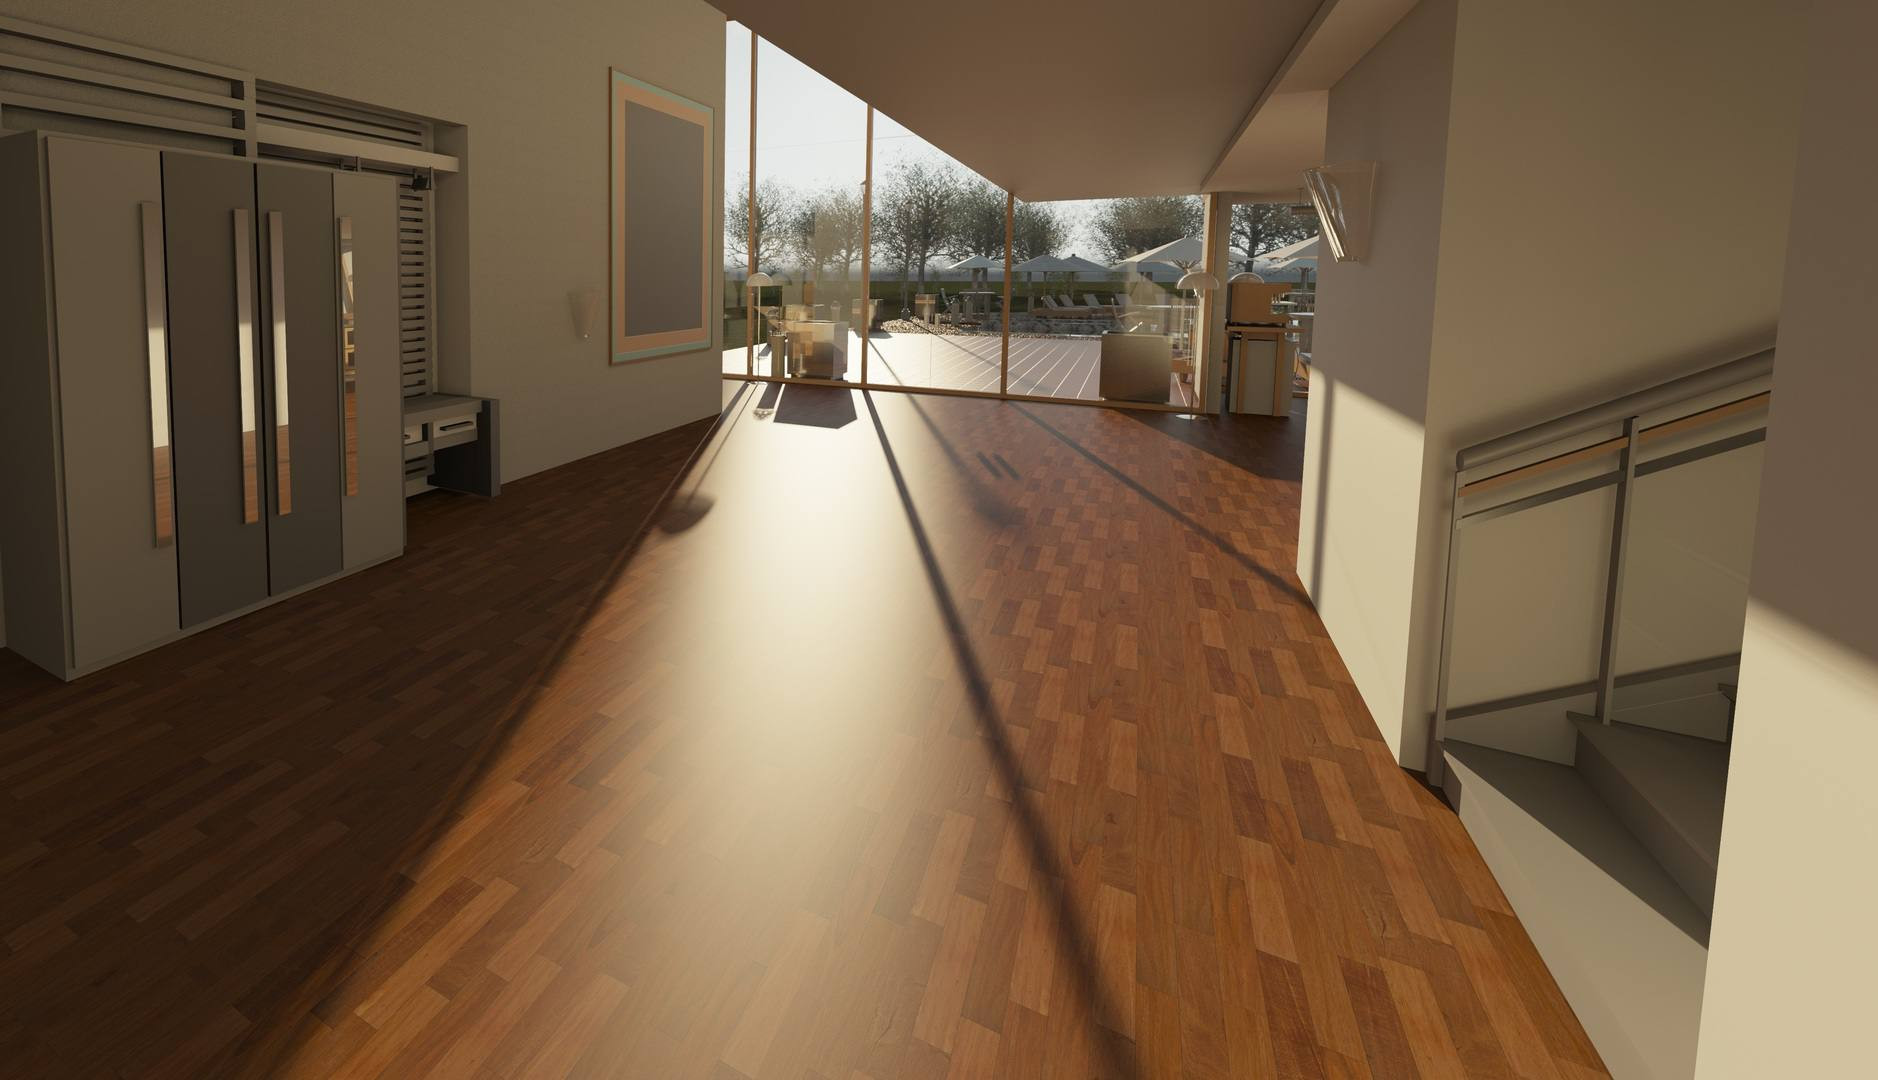 15 Great Floorscapes Quality Hardwood Flooring 2022 free download floorscapes quality hardwood flooring of common flooring types currently used in renovation and building with regard to architecture wood house floor interior window 917178 pxhere com 5ba27a